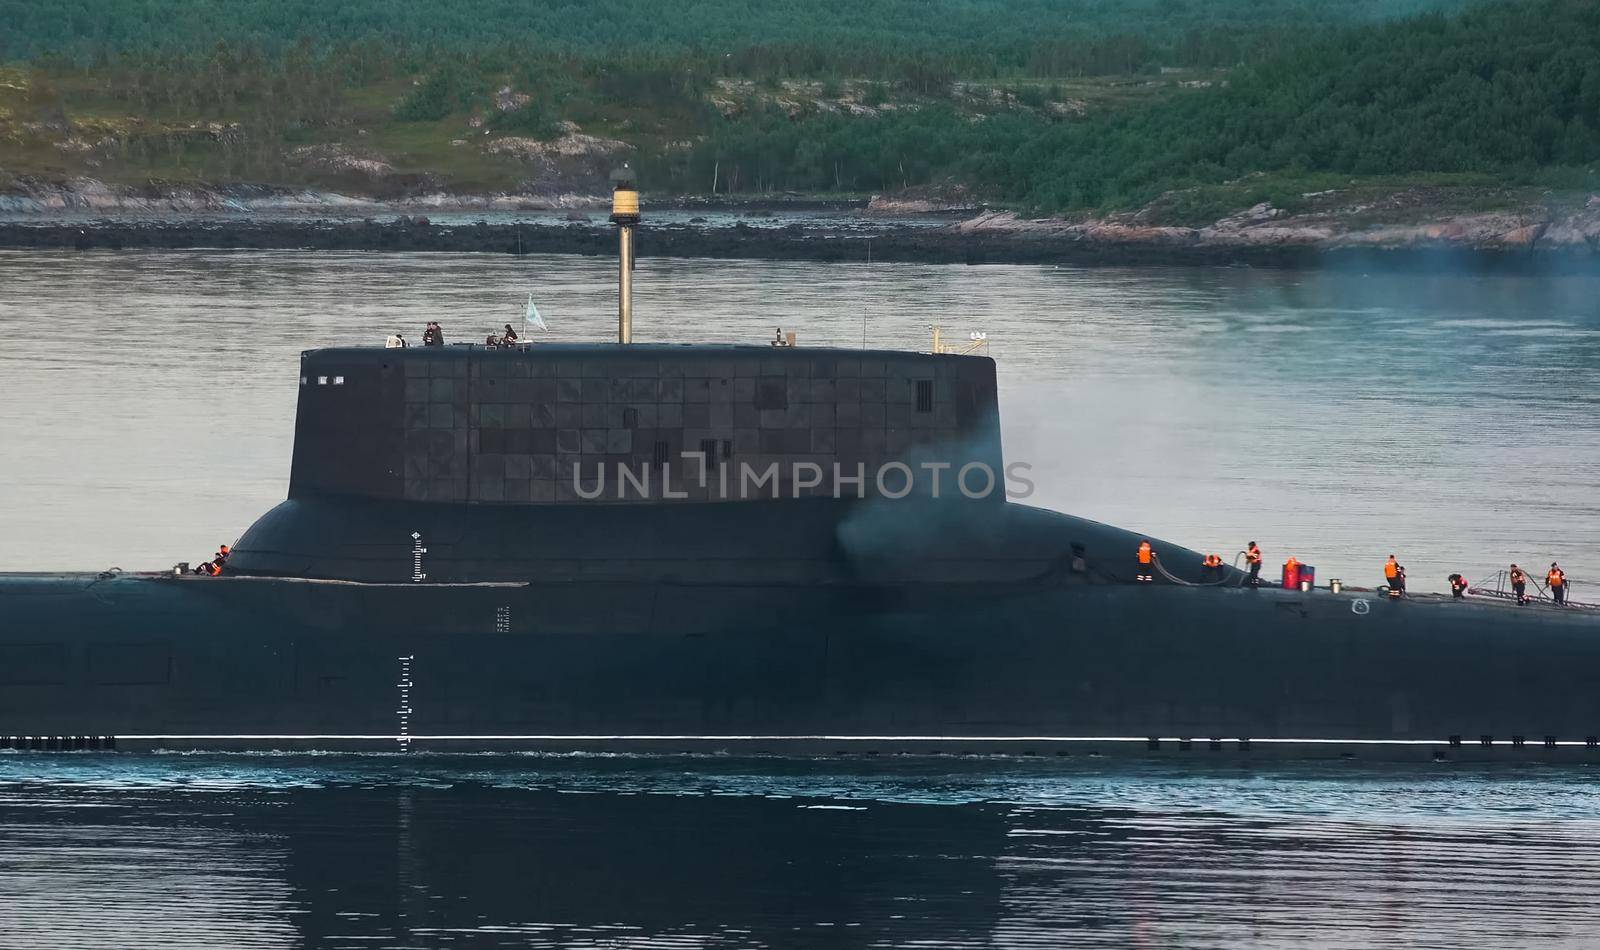 Russian nuclear submarine by DePo